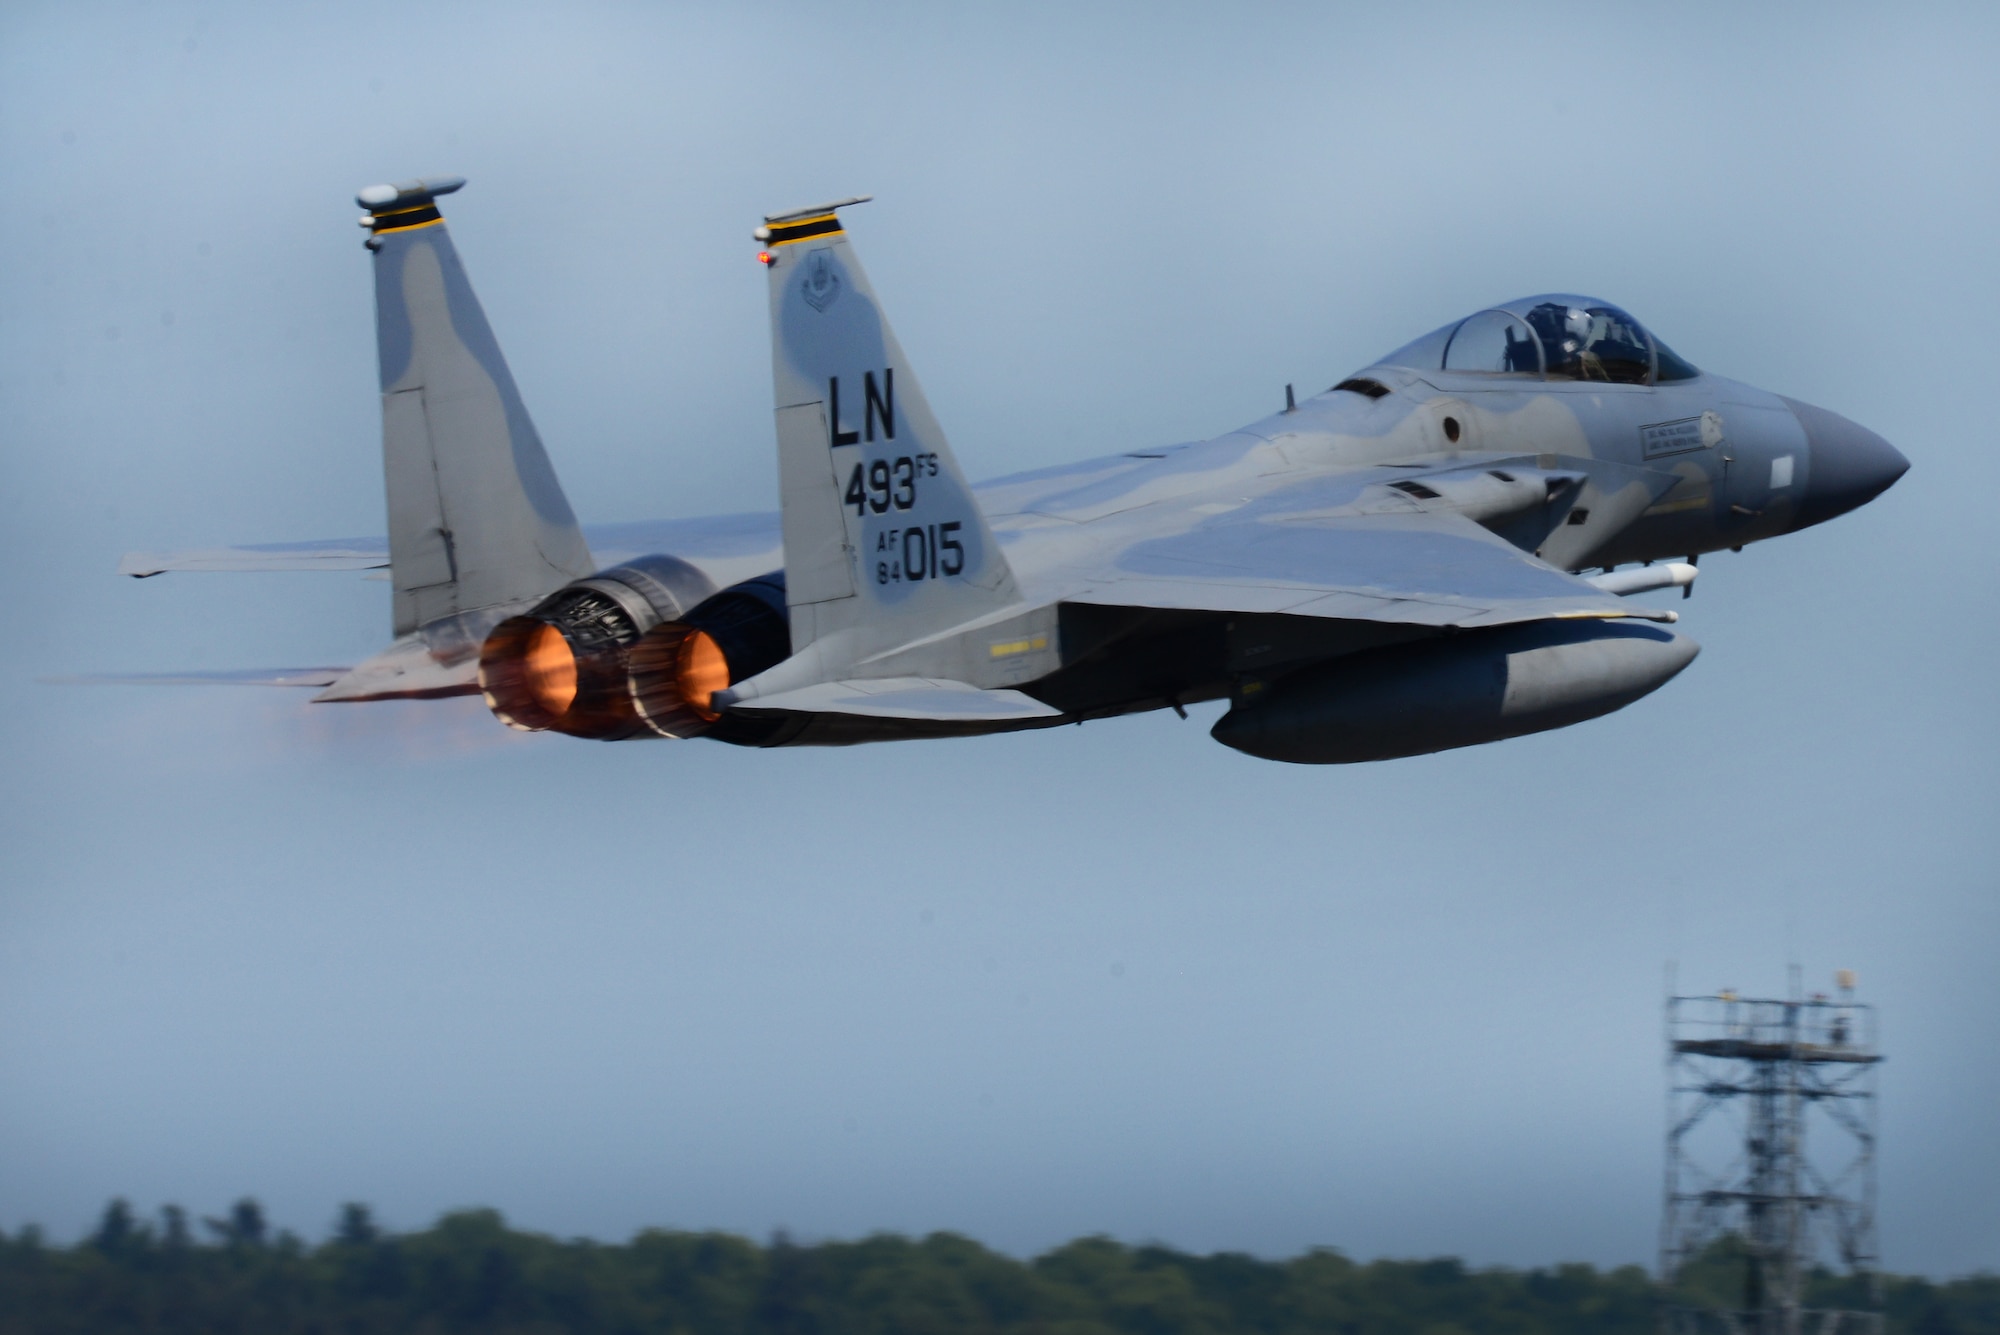 An F-15C Eagle assigned to the 493rd Fighter Squadron takes off at Royal Air Force Lakenheath, England, in support of Exercise POINTBLANK May 24, 2018. The objective is to prepare Coalition warfighters for a highly contested fight against near-peer adversaries by providing a multi-dimensional battle-space to conduct advanced training in support of U.S. and U.K. national interests. (U.S. Air Force photo/ Tech. Sgt. Matthew Plew)